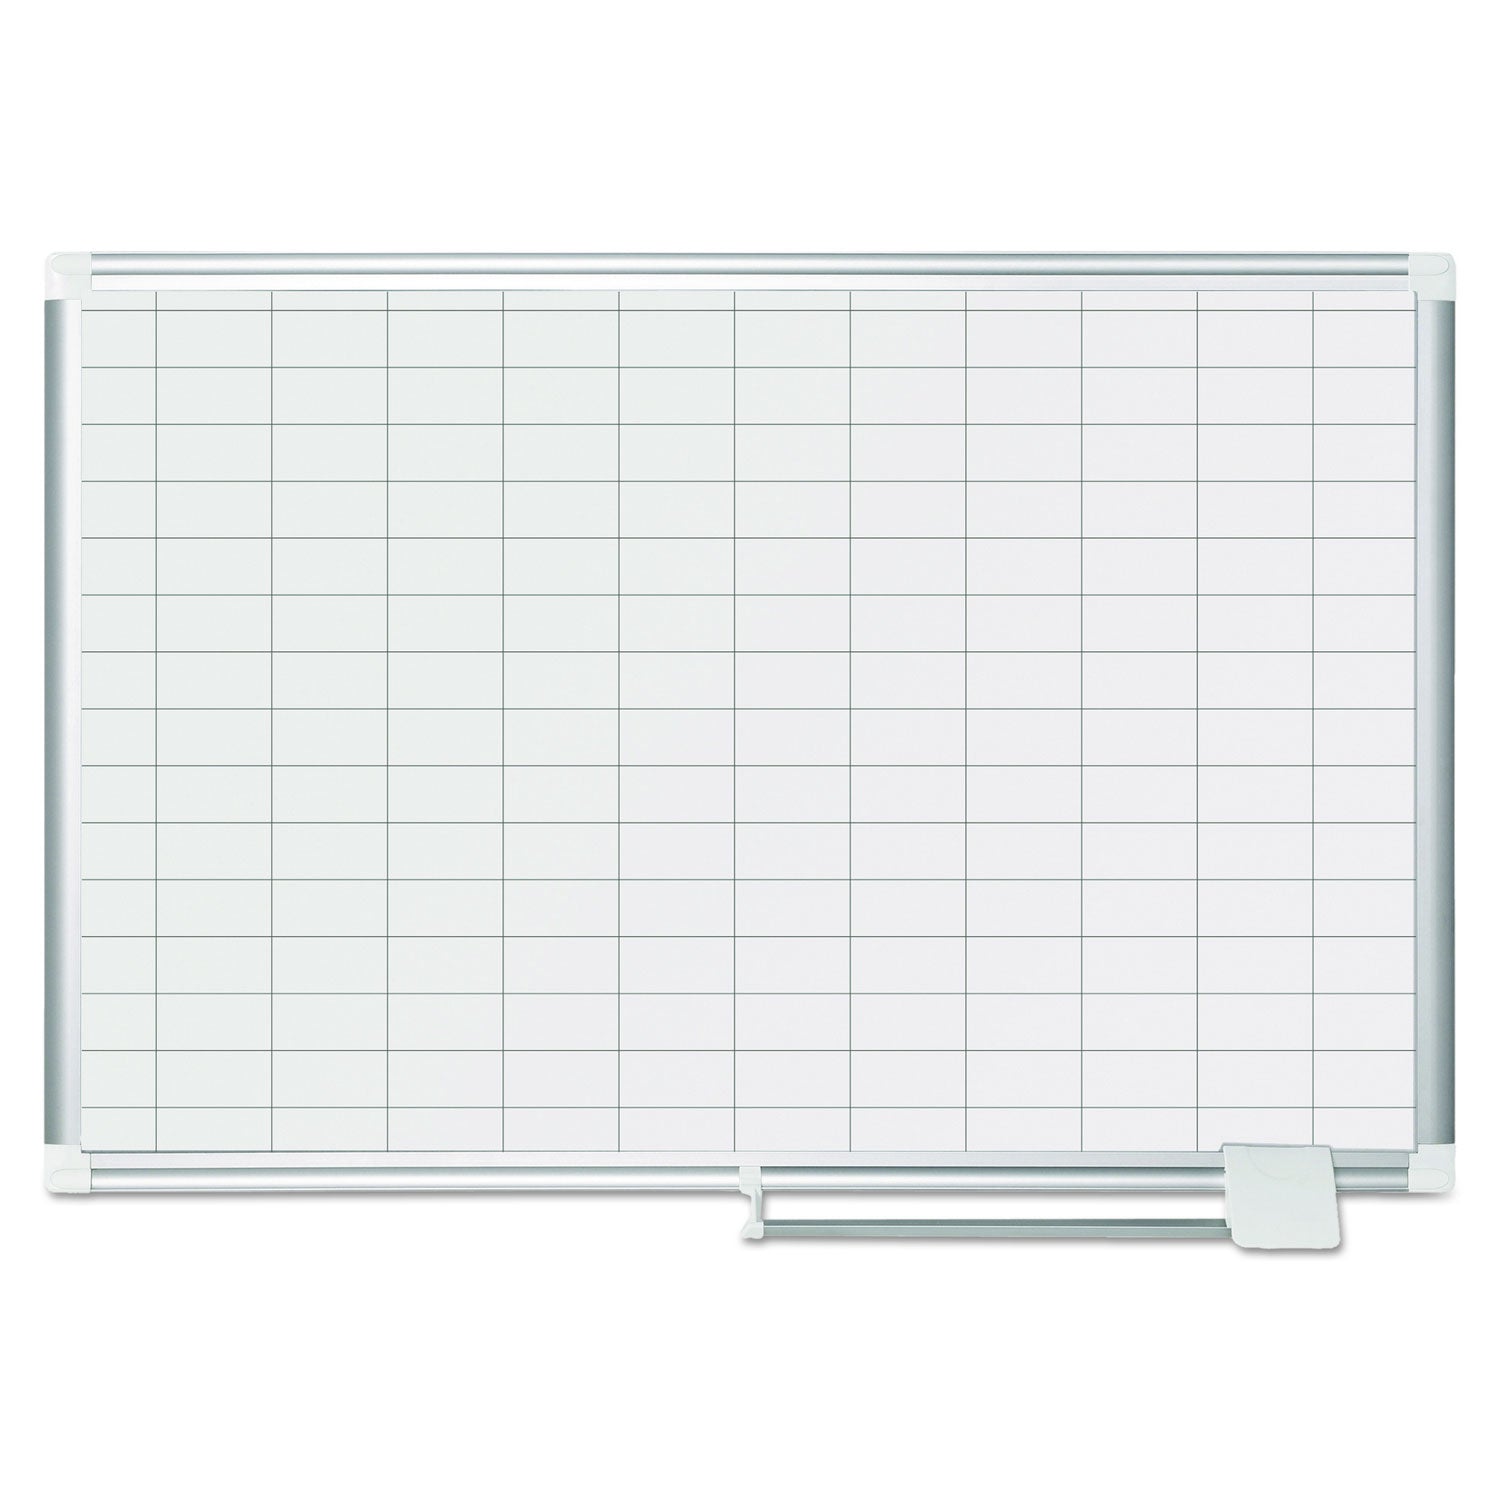 Gridded Magnetic Steel Dry Erase Planning Board, 1 x 2 Grid, 36 x 24, White Surface, Silver Aluminum Frame - 